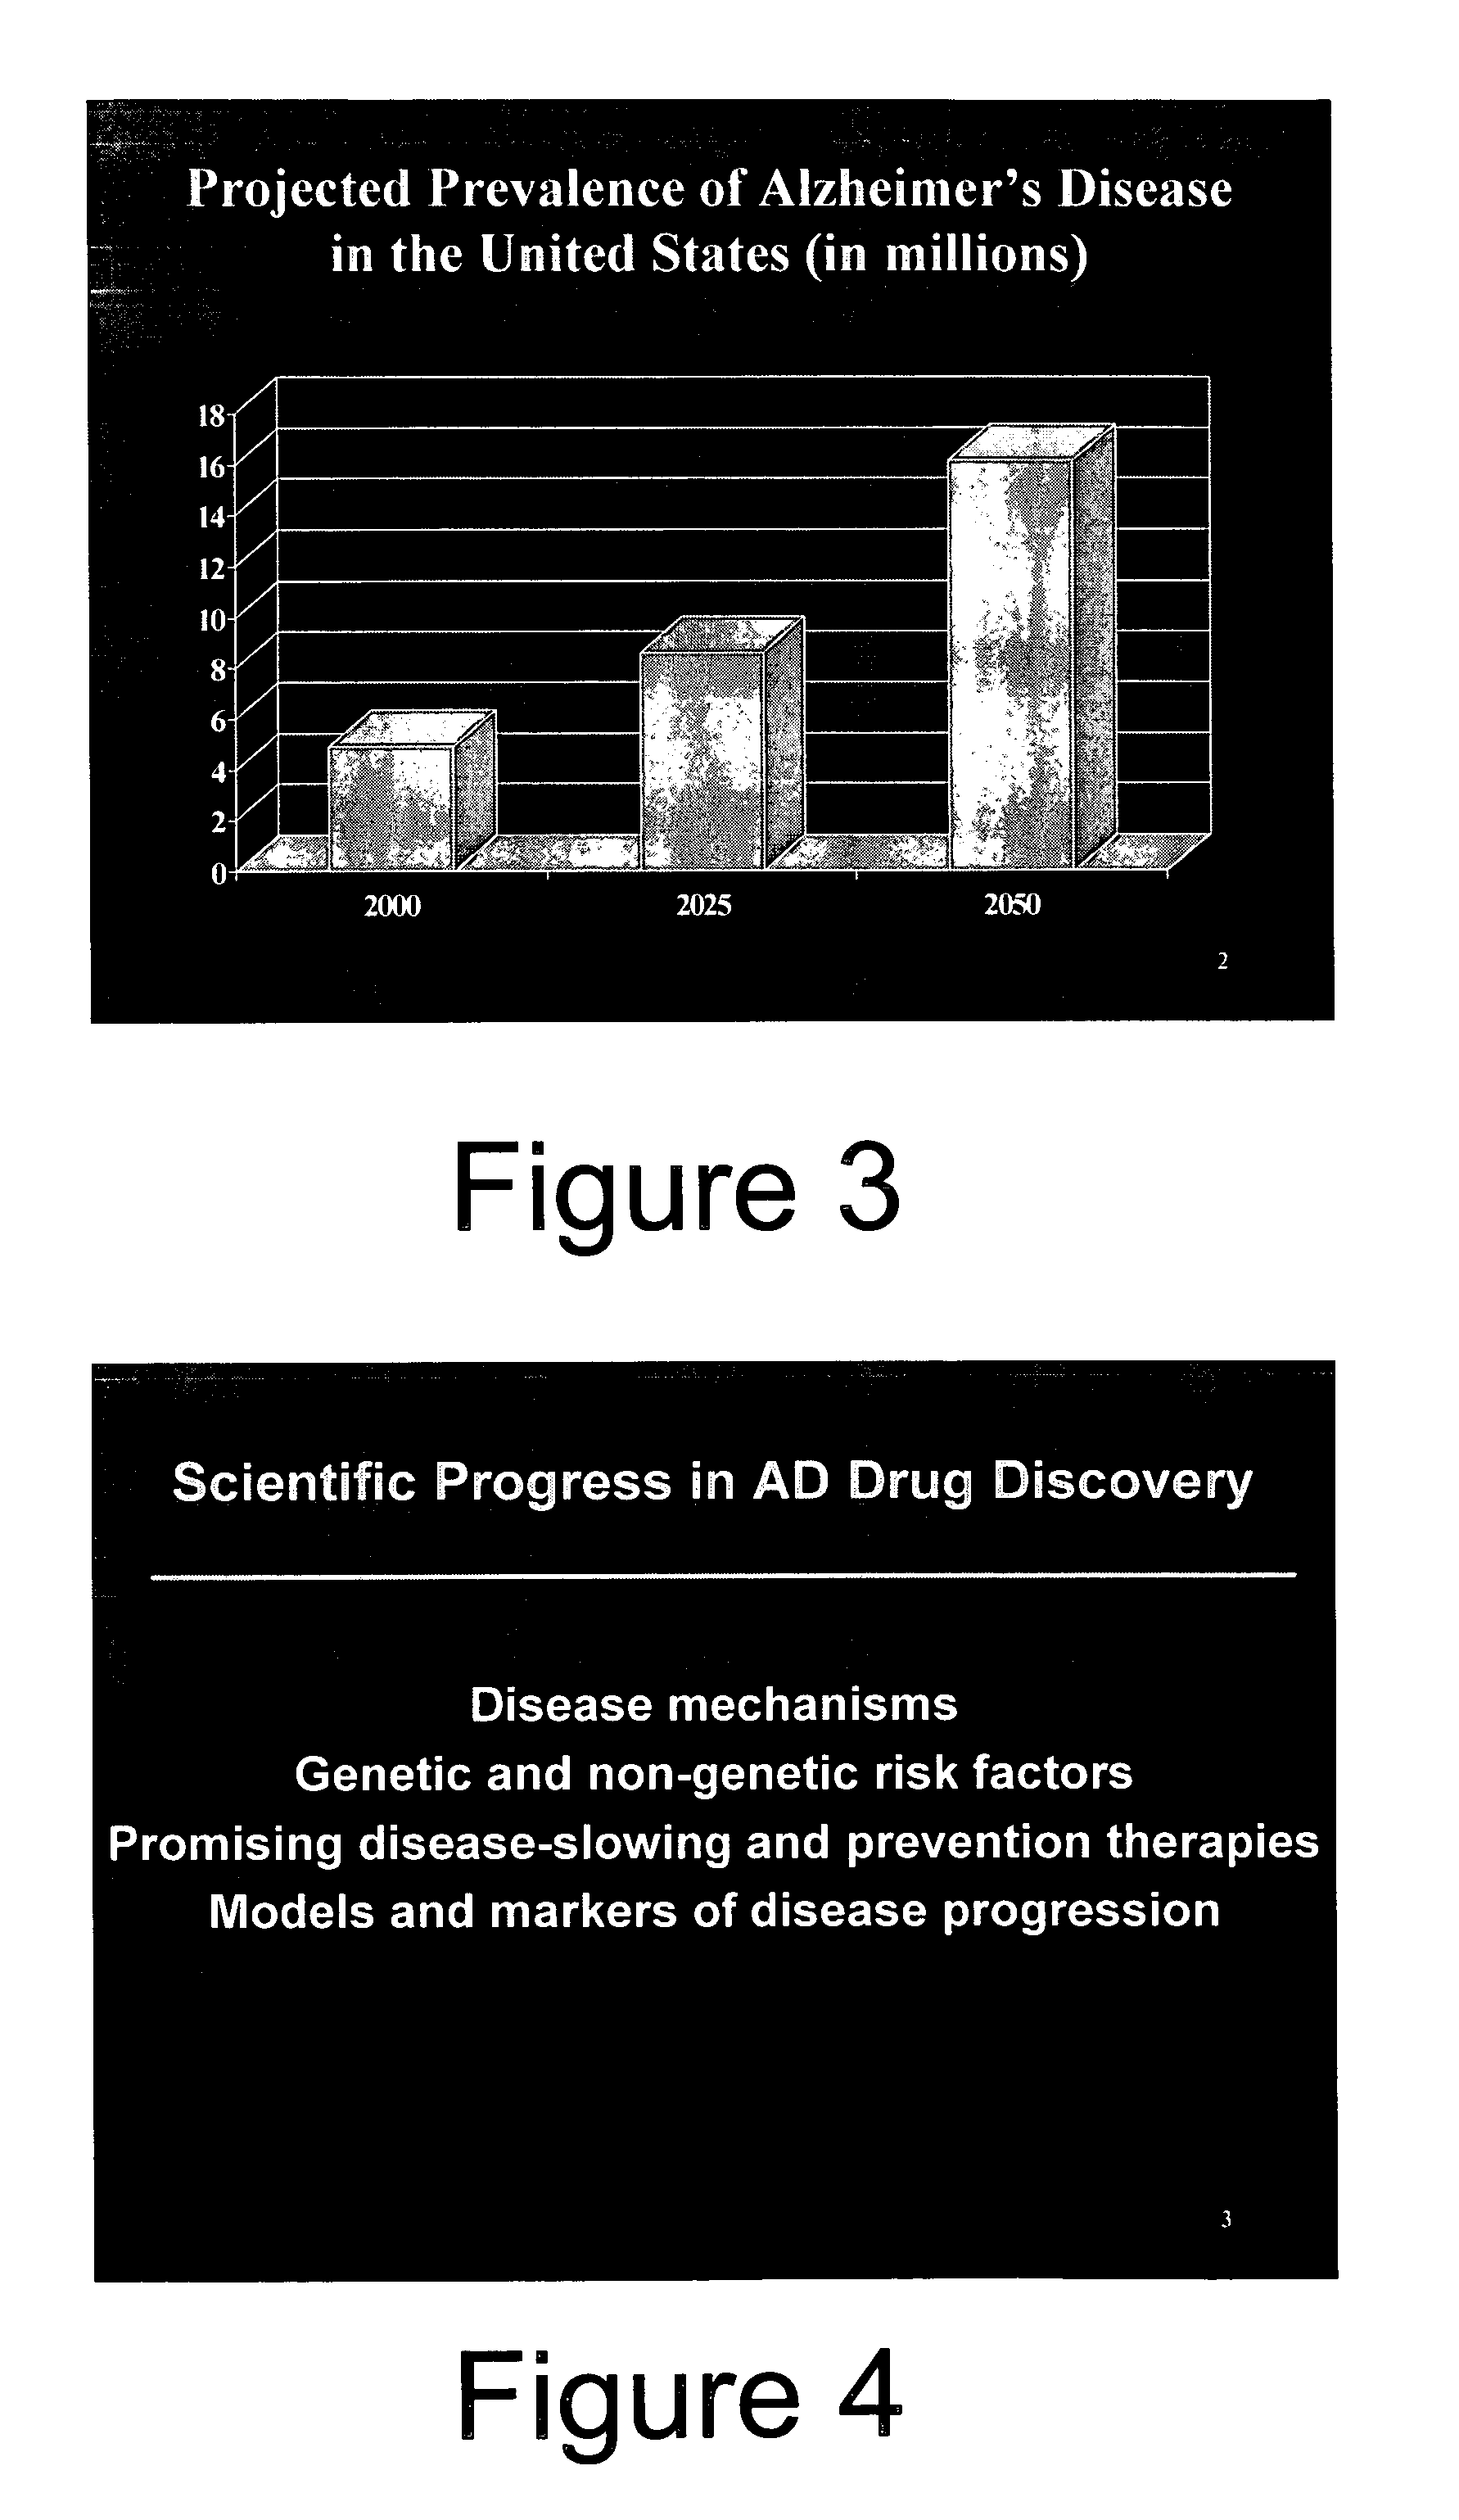 Evaluation of a treatment to decrease the risk of a progressive brain disorder or to slow brain aging